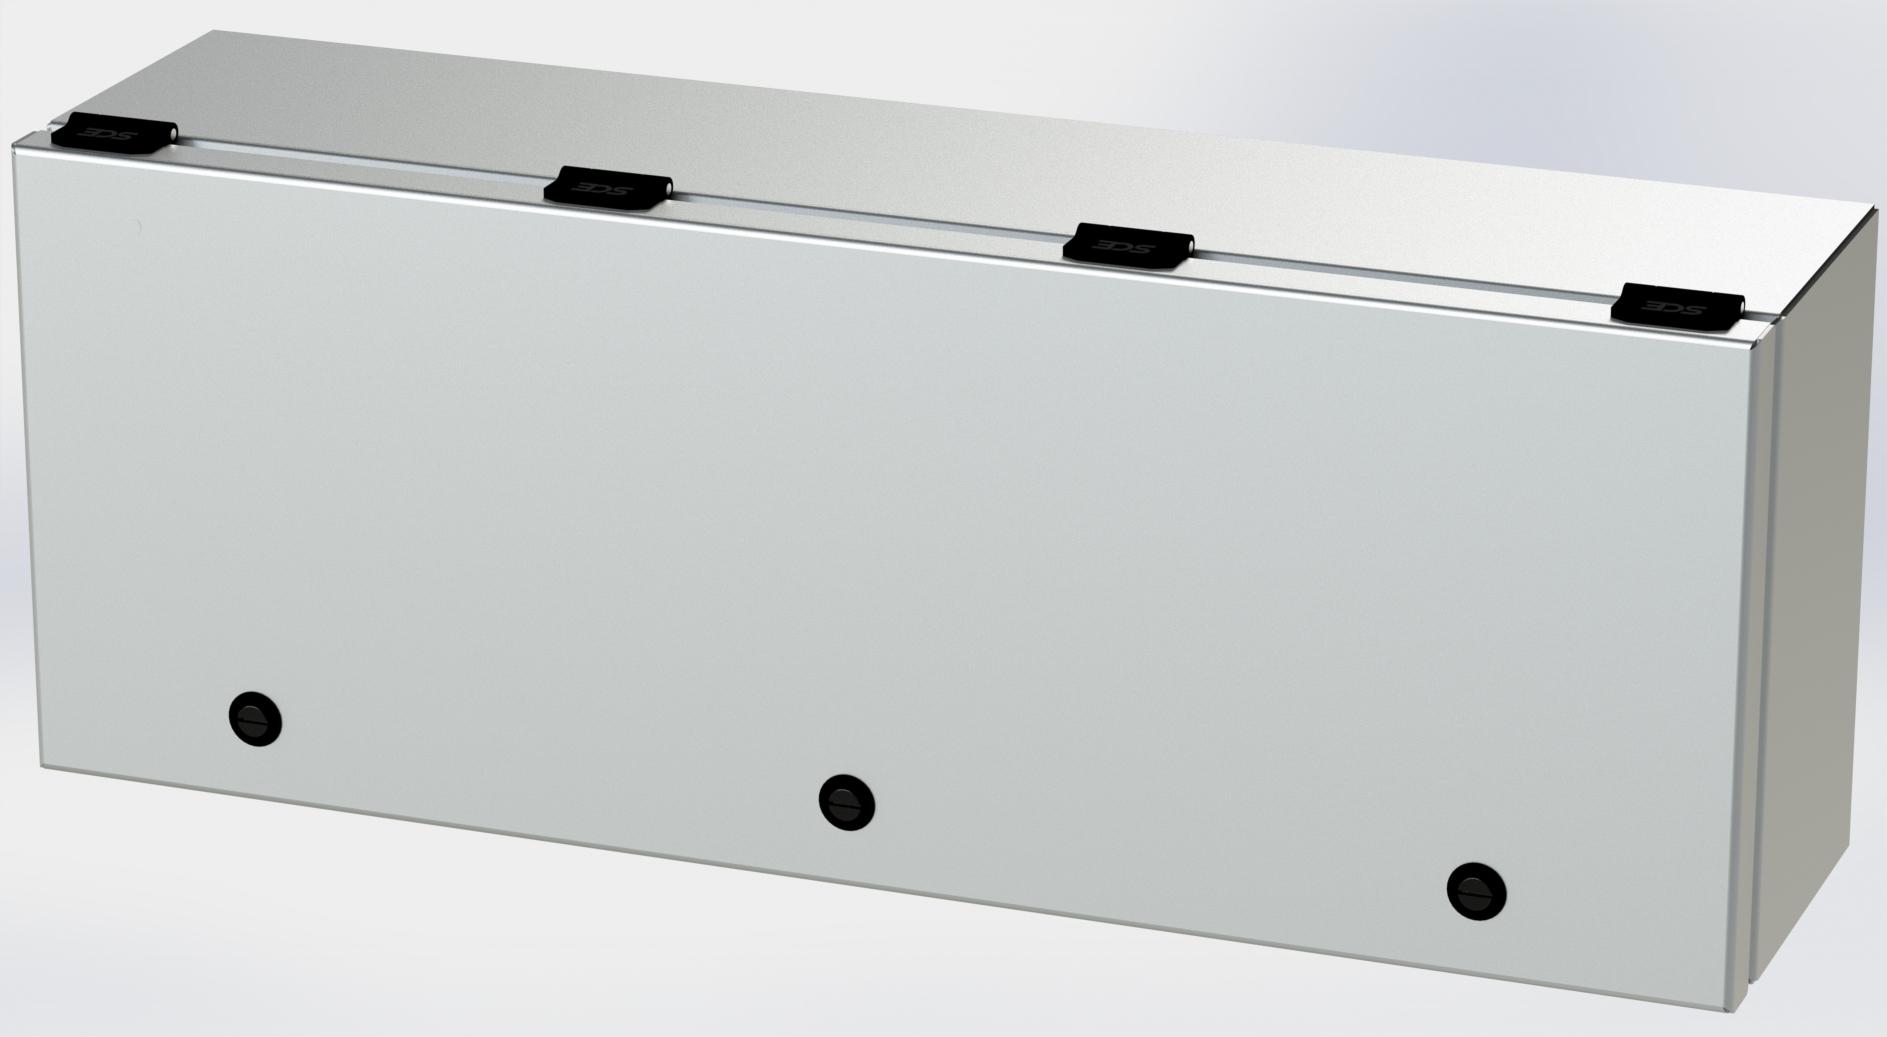 Saginaw Control SCE-L9246ELJSS S.S. ELJ Trough Enclosure, Height:9.00", Width:24.00", Depth:6.00", #4 brushed finish on all exterior surfaces. Optional sub-panels are powder coated white.